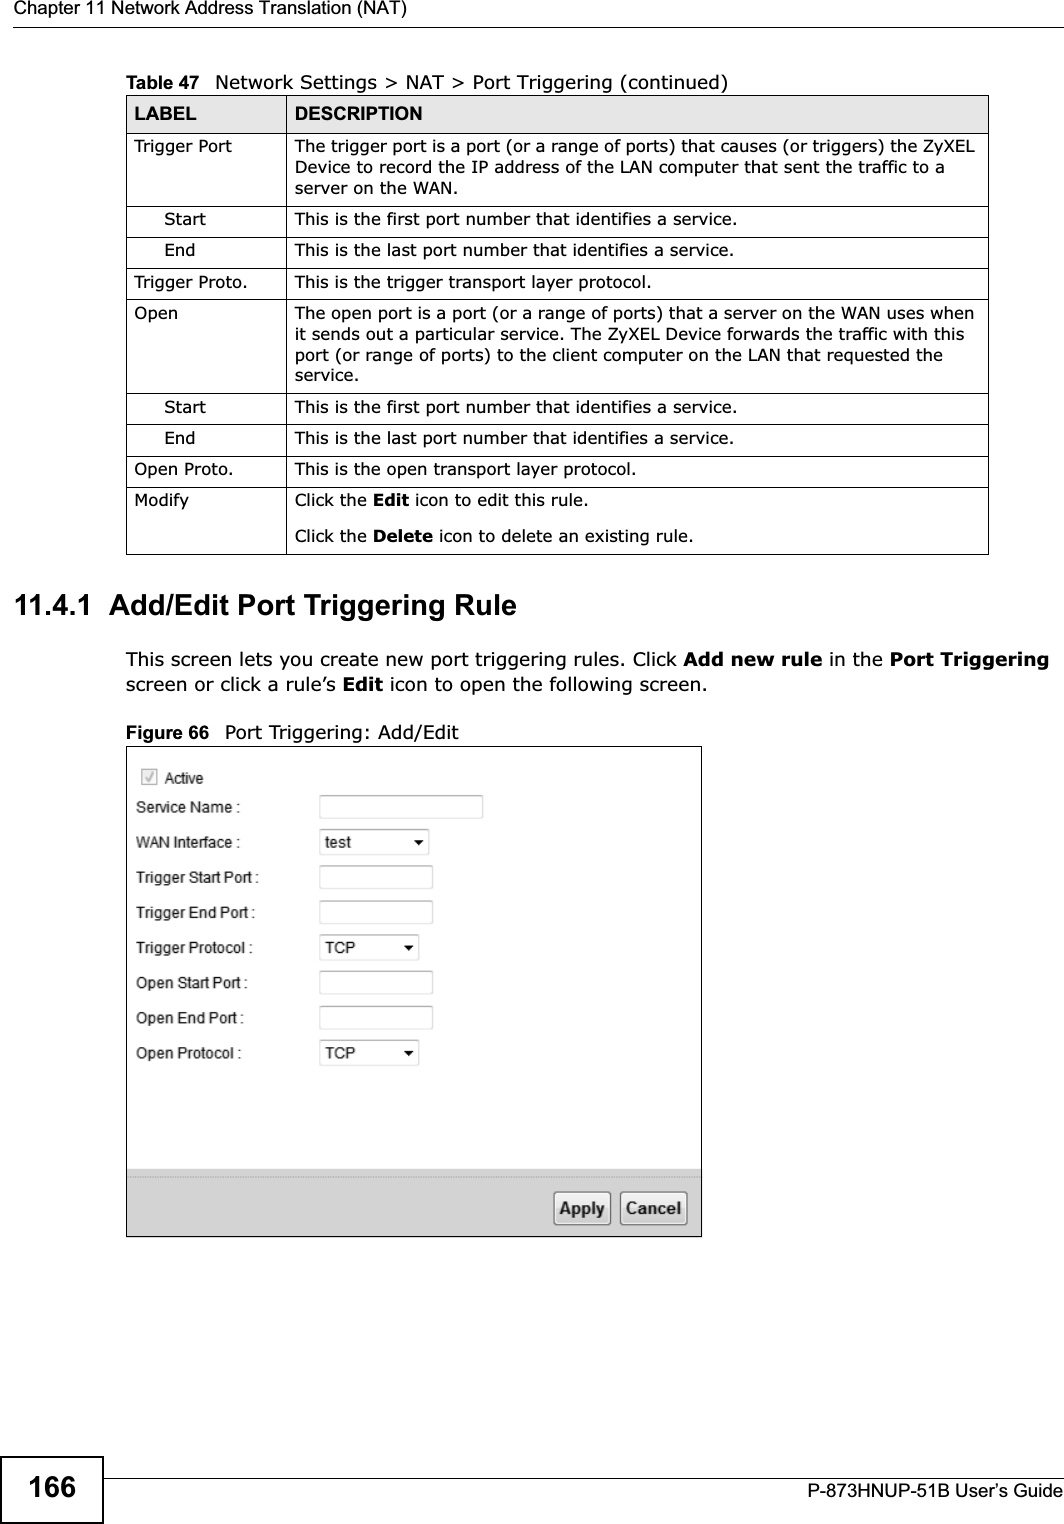 Chapter 11 Network Address Translation (NAT)P-873HNUP-51B User’s Guide16611.4.1  Add/Edit Port Triggering Rule This screen lets you create new port triggering rules. Click Add new rule in the Port Triggering screen or click a rule’s Edit icon to open the following screen.Figure 66   Port Triggering: Add/Edit Trigger Port The trigger port is a port (or a range of ports) that causes (or triggers) the ZyXEL Device to record the IP address of the LAN computer that sent the traffic to a server on the WAN.Start This is the first port number that identifies a service.End This is the last port number that identifies a service.Trigger Proto. This is the trigger transport layer protocol. Open The open port is a port (or a range of ports) that a server on the WAN uses when it sends out a particular service. The ZyXEL Device forwards the traffic with this port (or range of ports) to the client computer on the LAN that requested the service. Start This is the first port number that identifies a service.End This is the last port number that identifies a service.Open Proto. This is the open transport layer protocol.Modify Click the Edit icon to edit this rule.Click the Delete icon to delete an existing rule. Table 47   Network Settings &gt; NAT &gt; Port Triggering (continued)LABEL DESCRIPTION